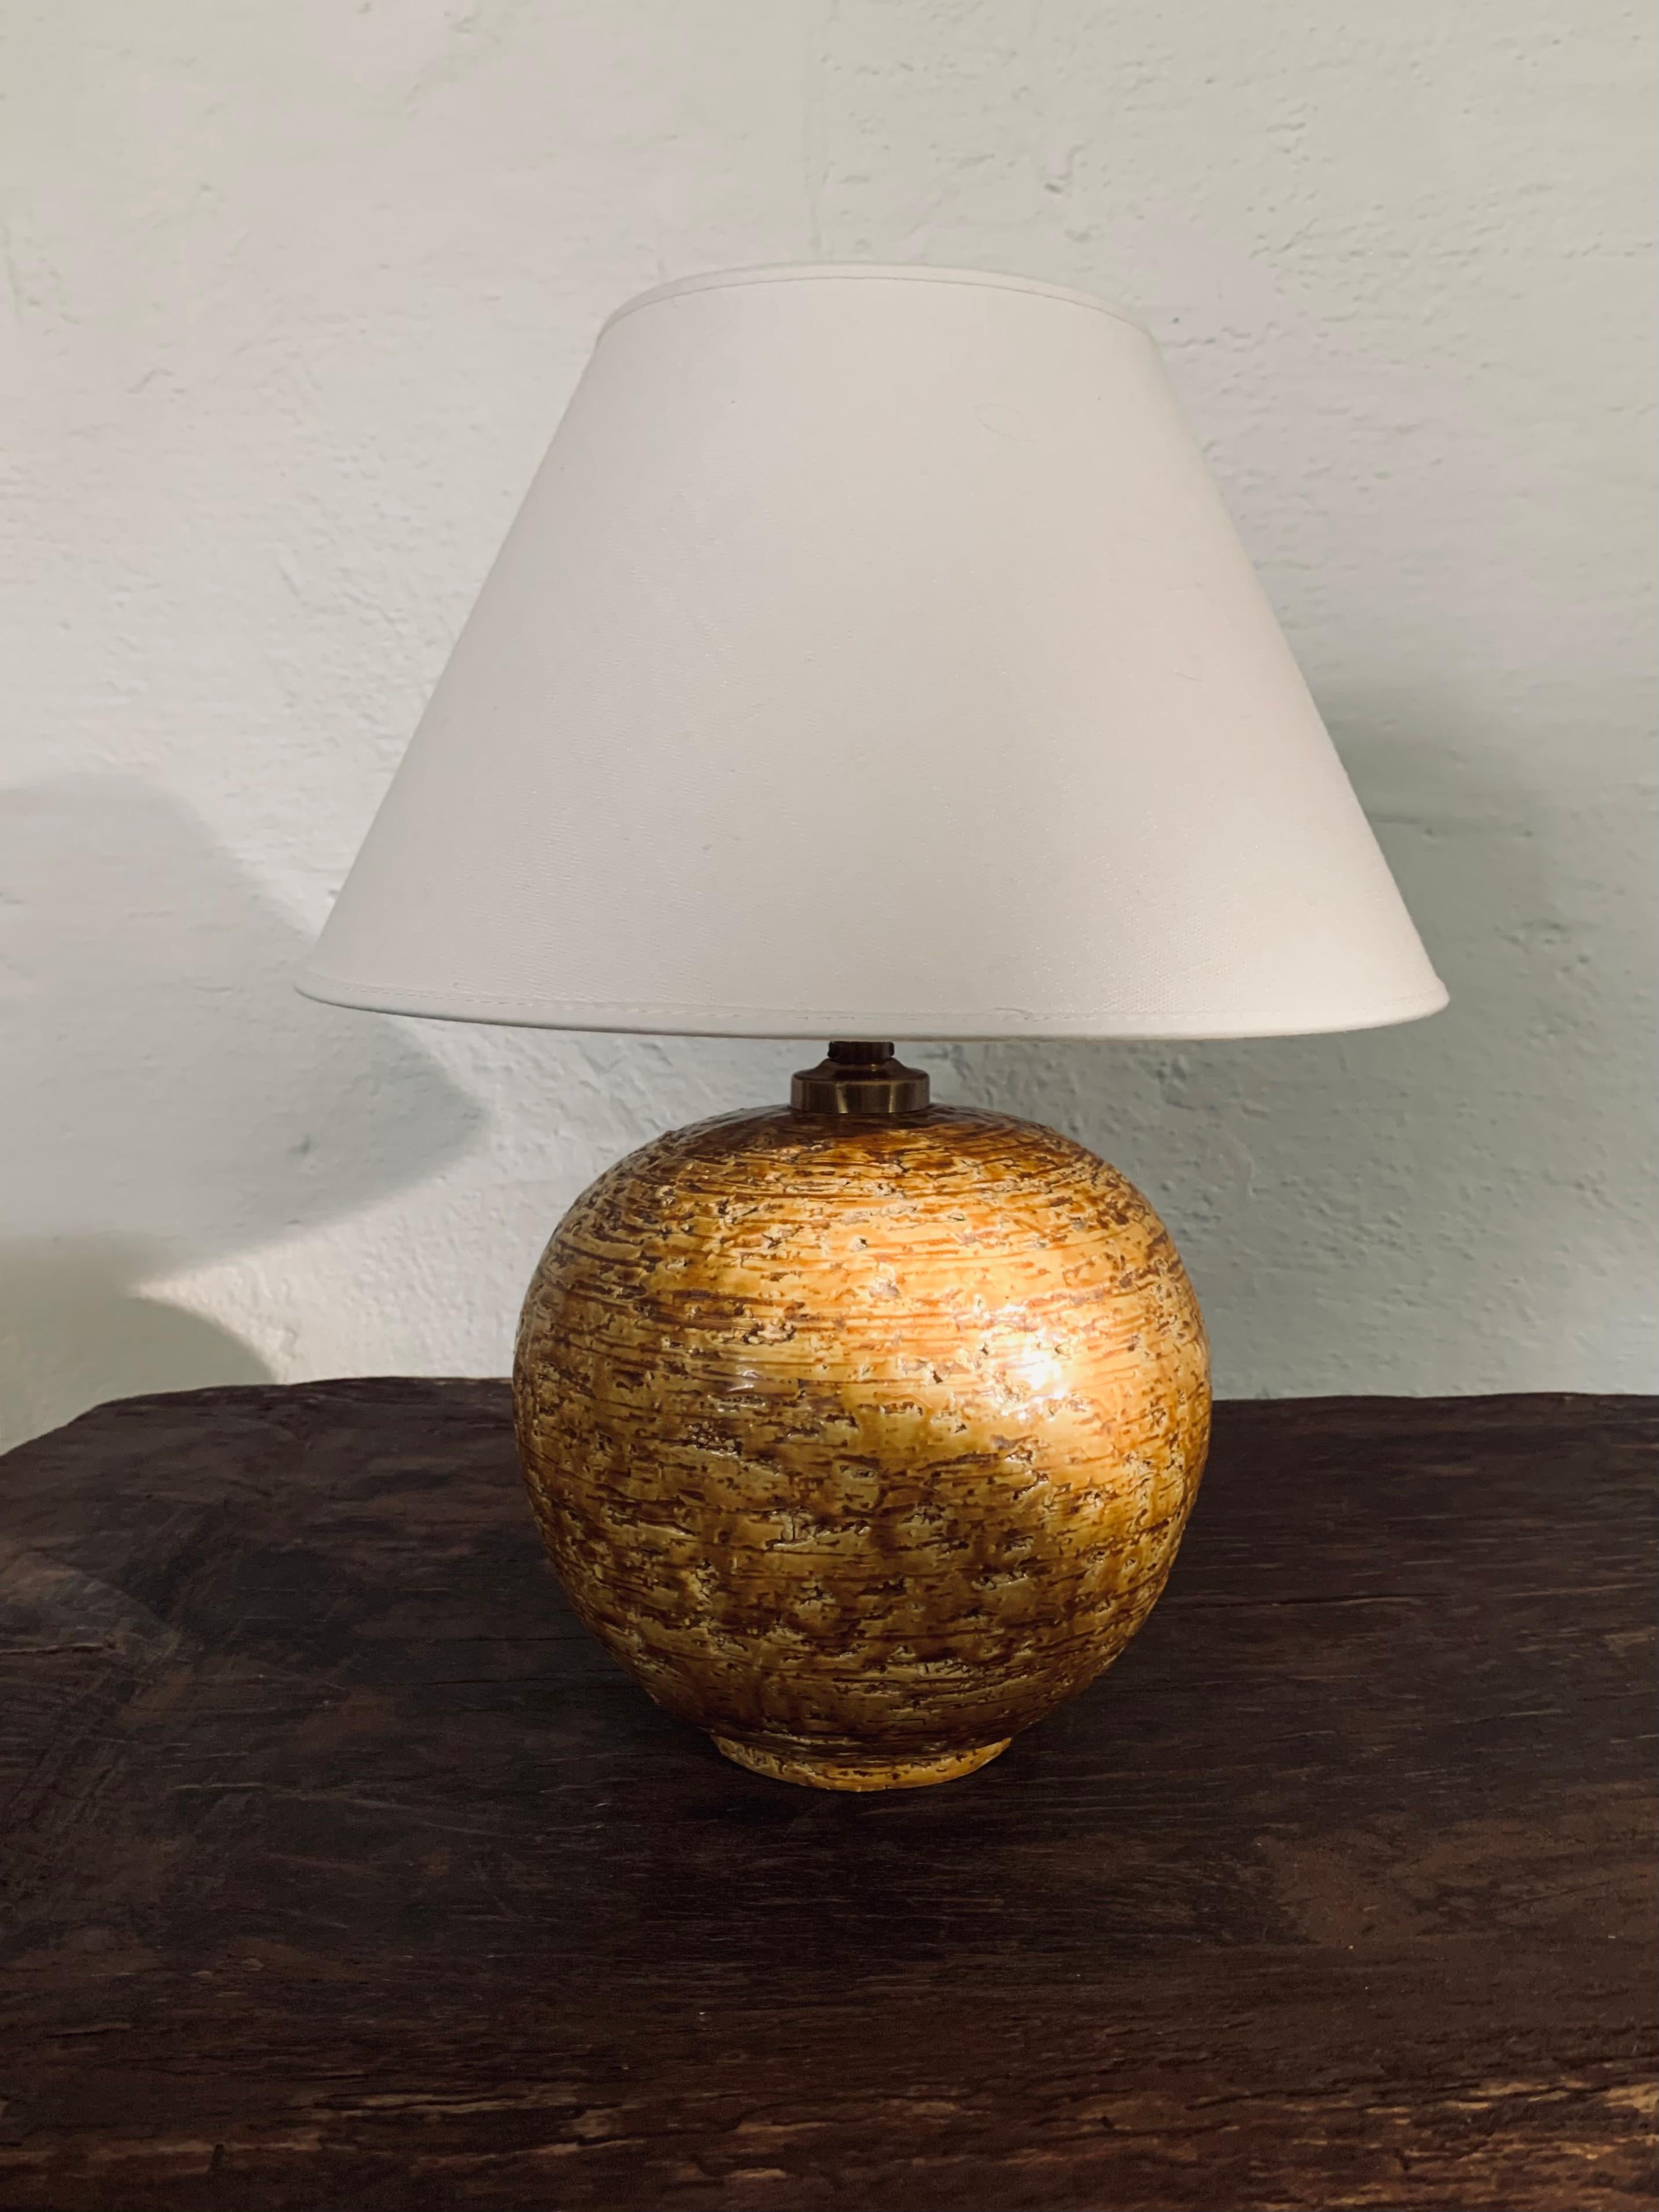 This stunning sculptural chamotte stoneware table lamp was designed by Gunnar Nylund for Rörstrand, Sweden, ca 1940s. Its spherical base has a tactile textured surface and mustard yellow glaze and comes with a white linnen shade. The lamp has been